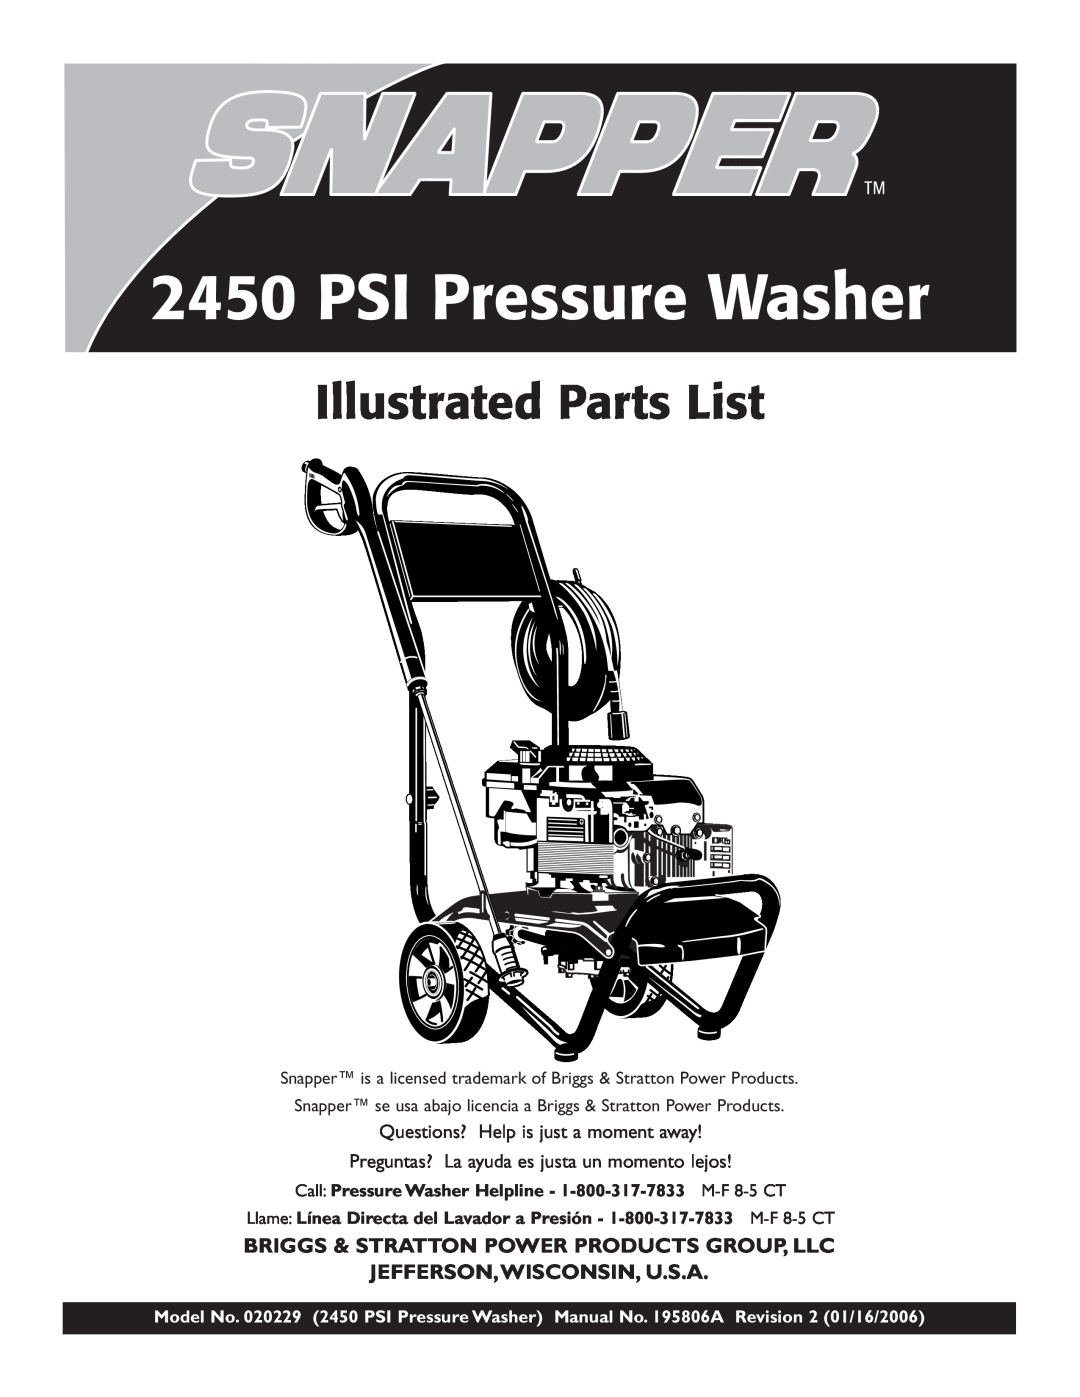 Briggs & Stratton 2450 PSI manual PSI Pressure Washer, Illustrated Parts List, Briggs & Stratton Power Products Group, Llc 